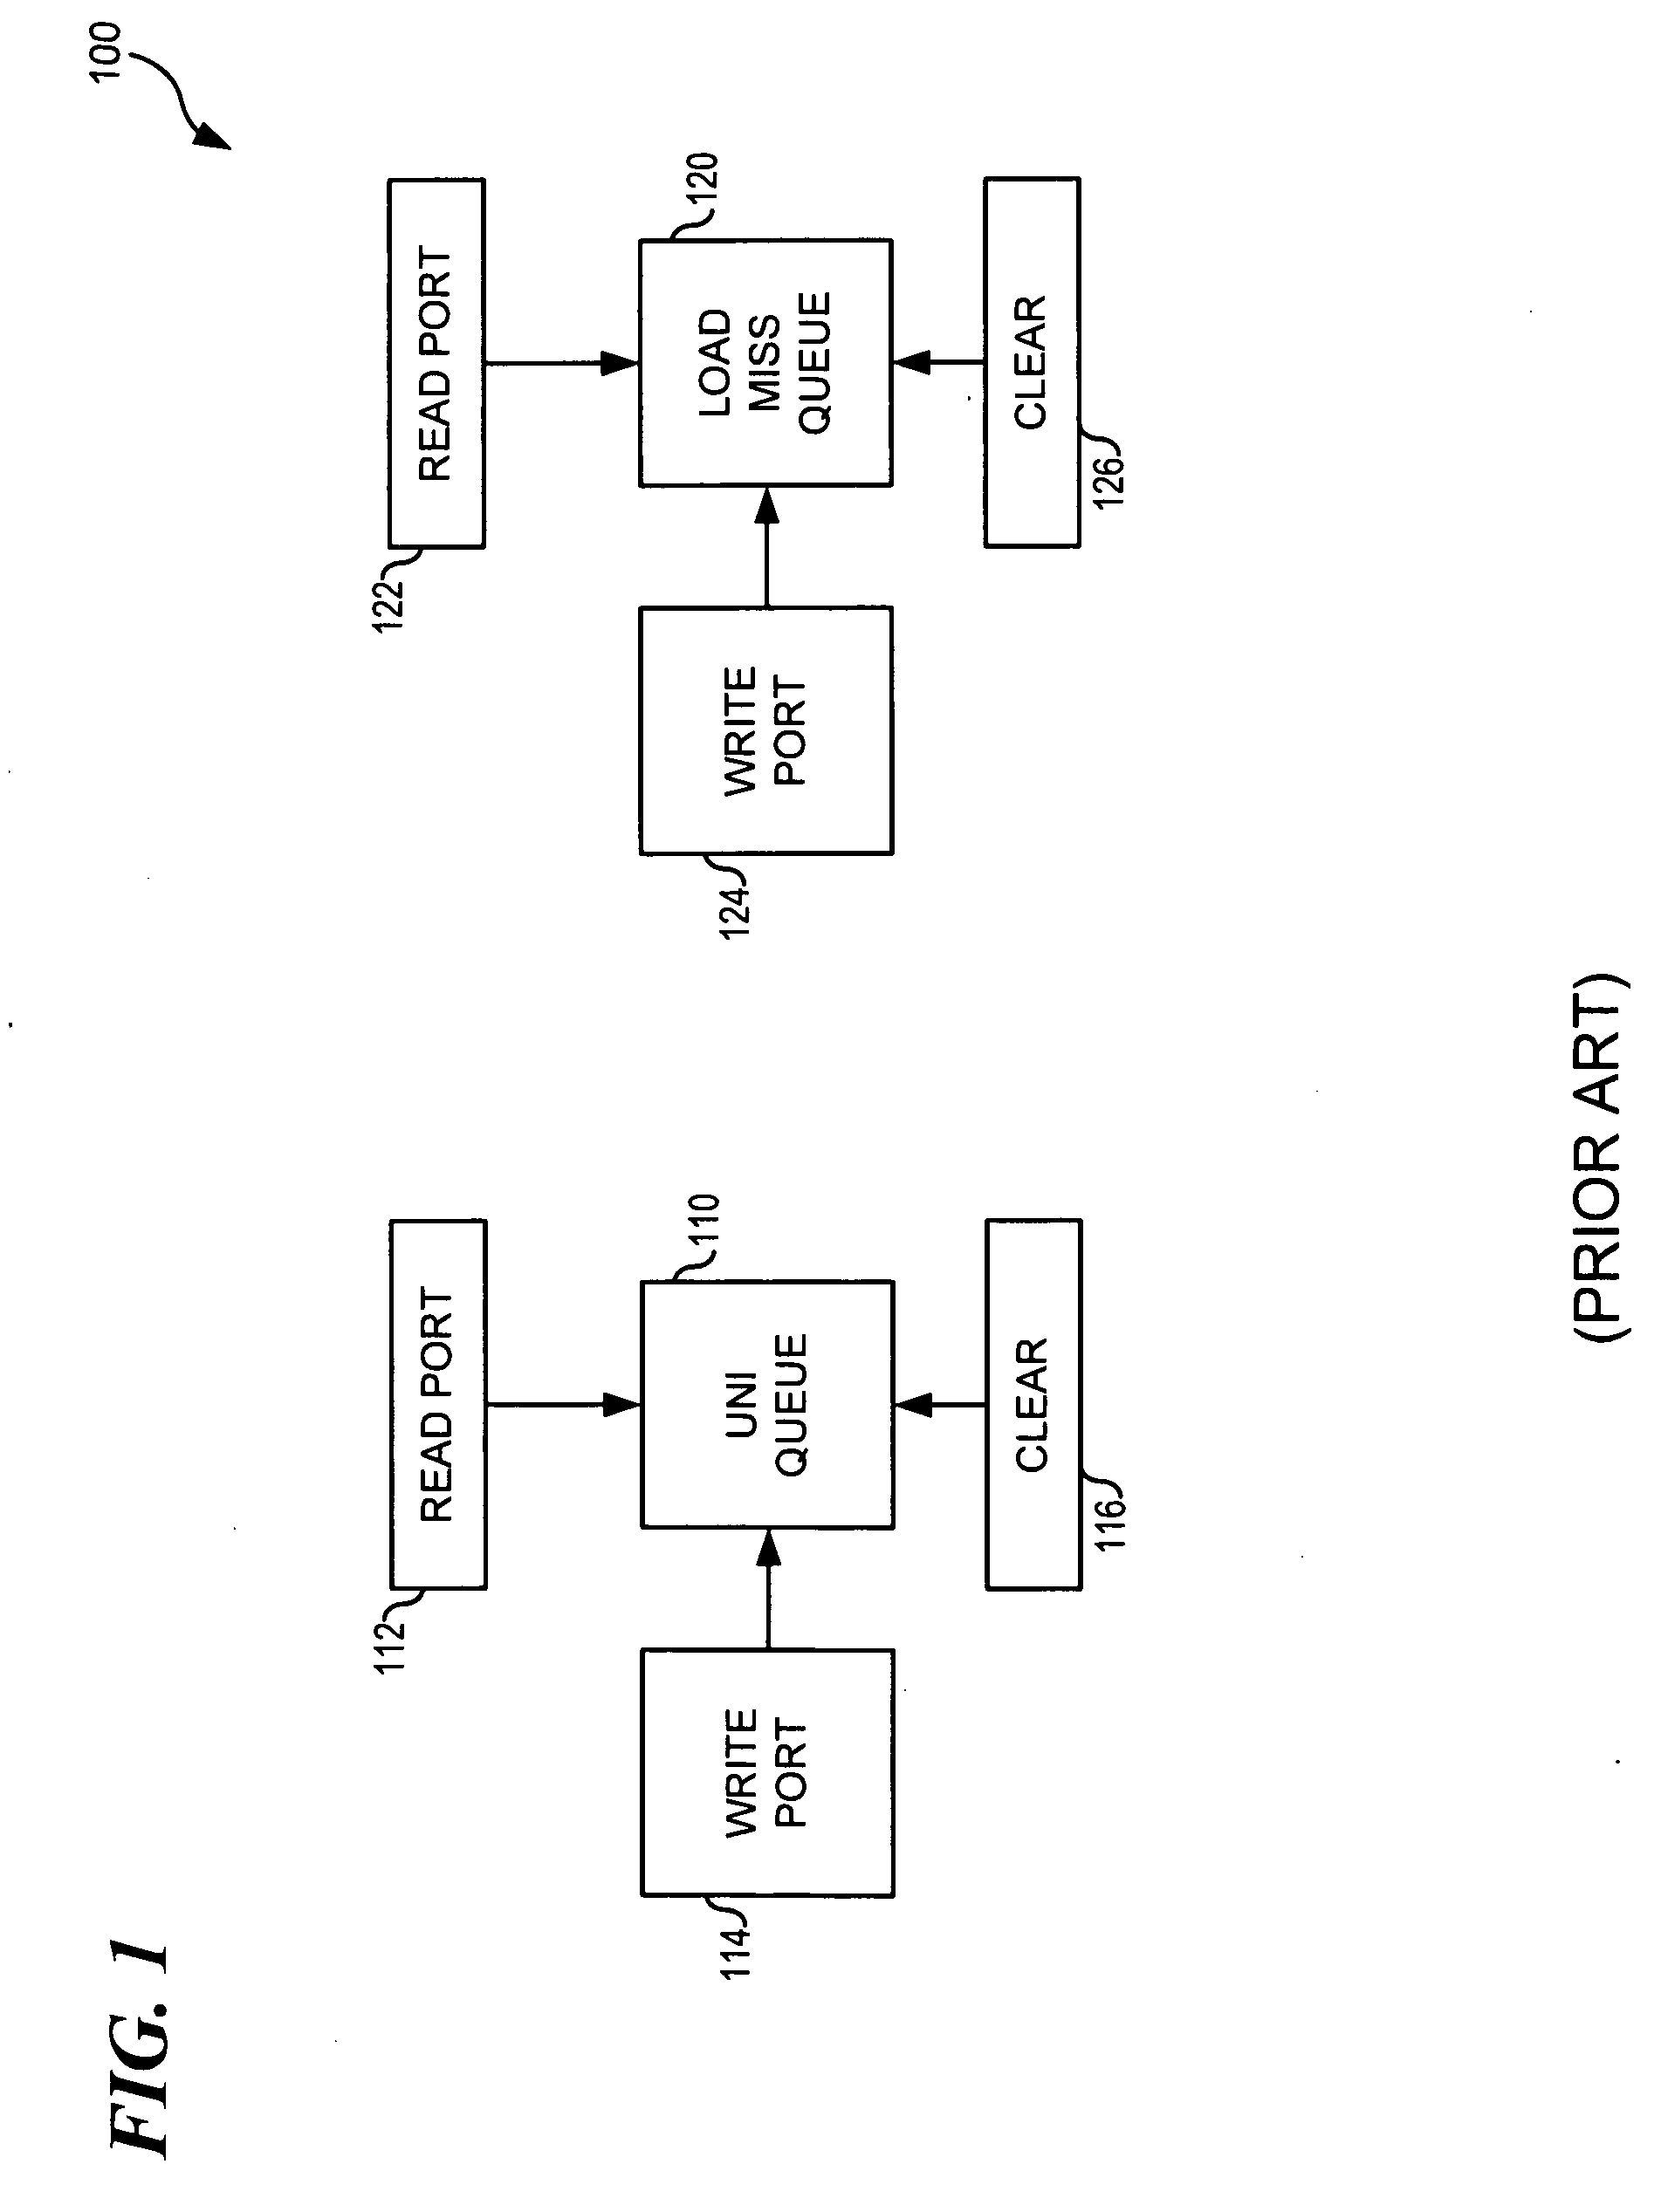 Dependency Matrix with Reduced Area and Power Consumption